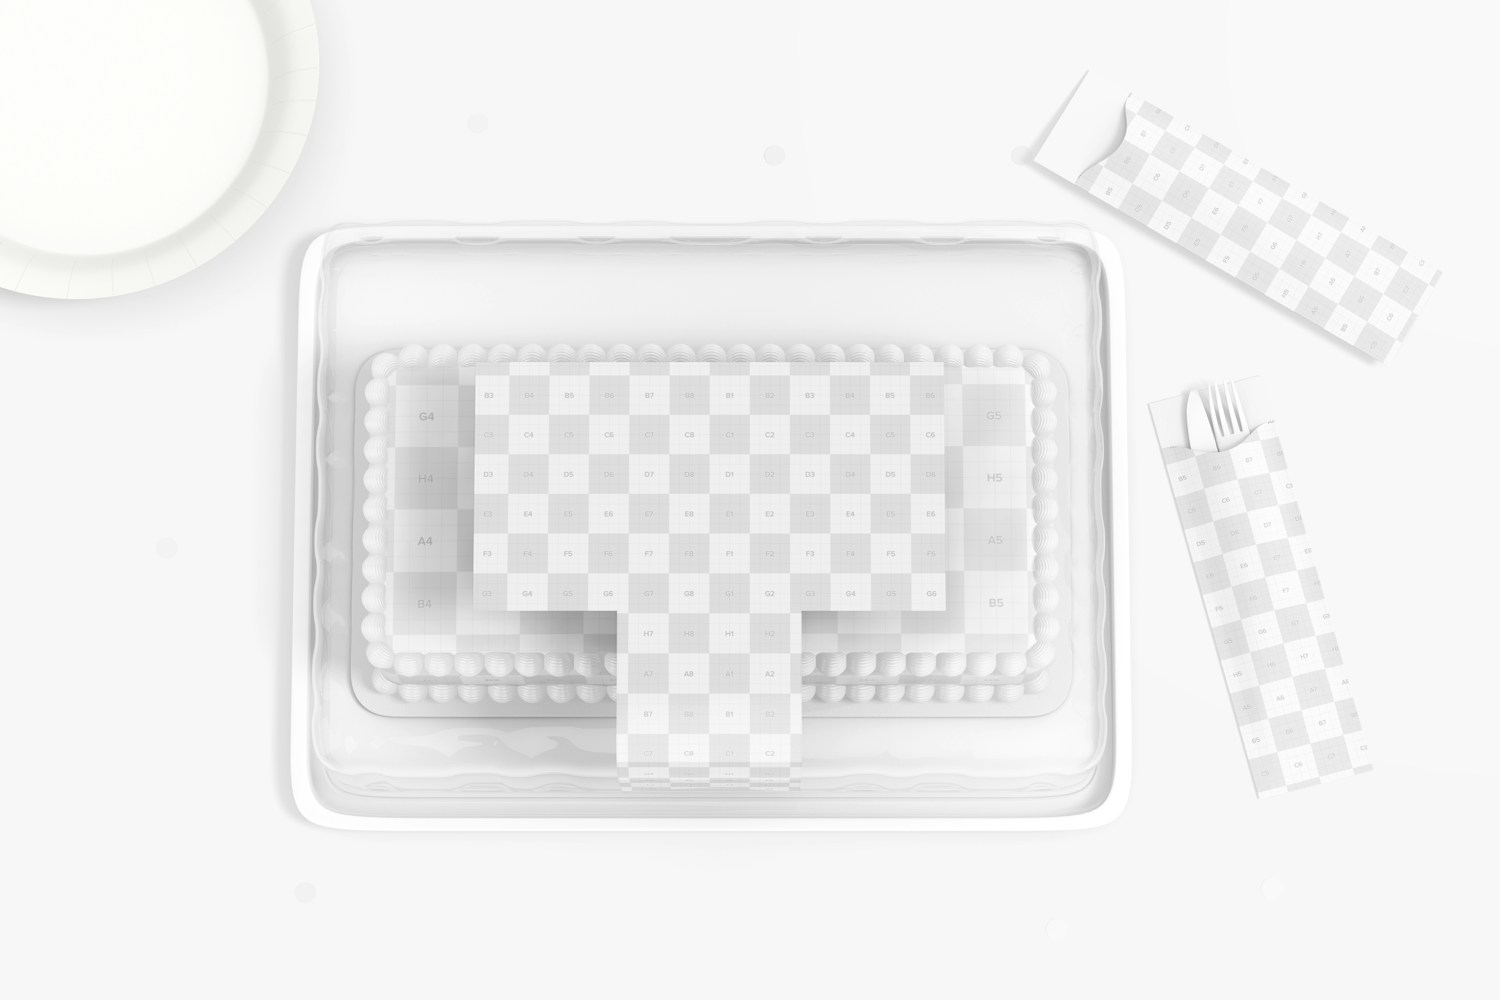 Plastic Square Cake Container Mockup, Top View